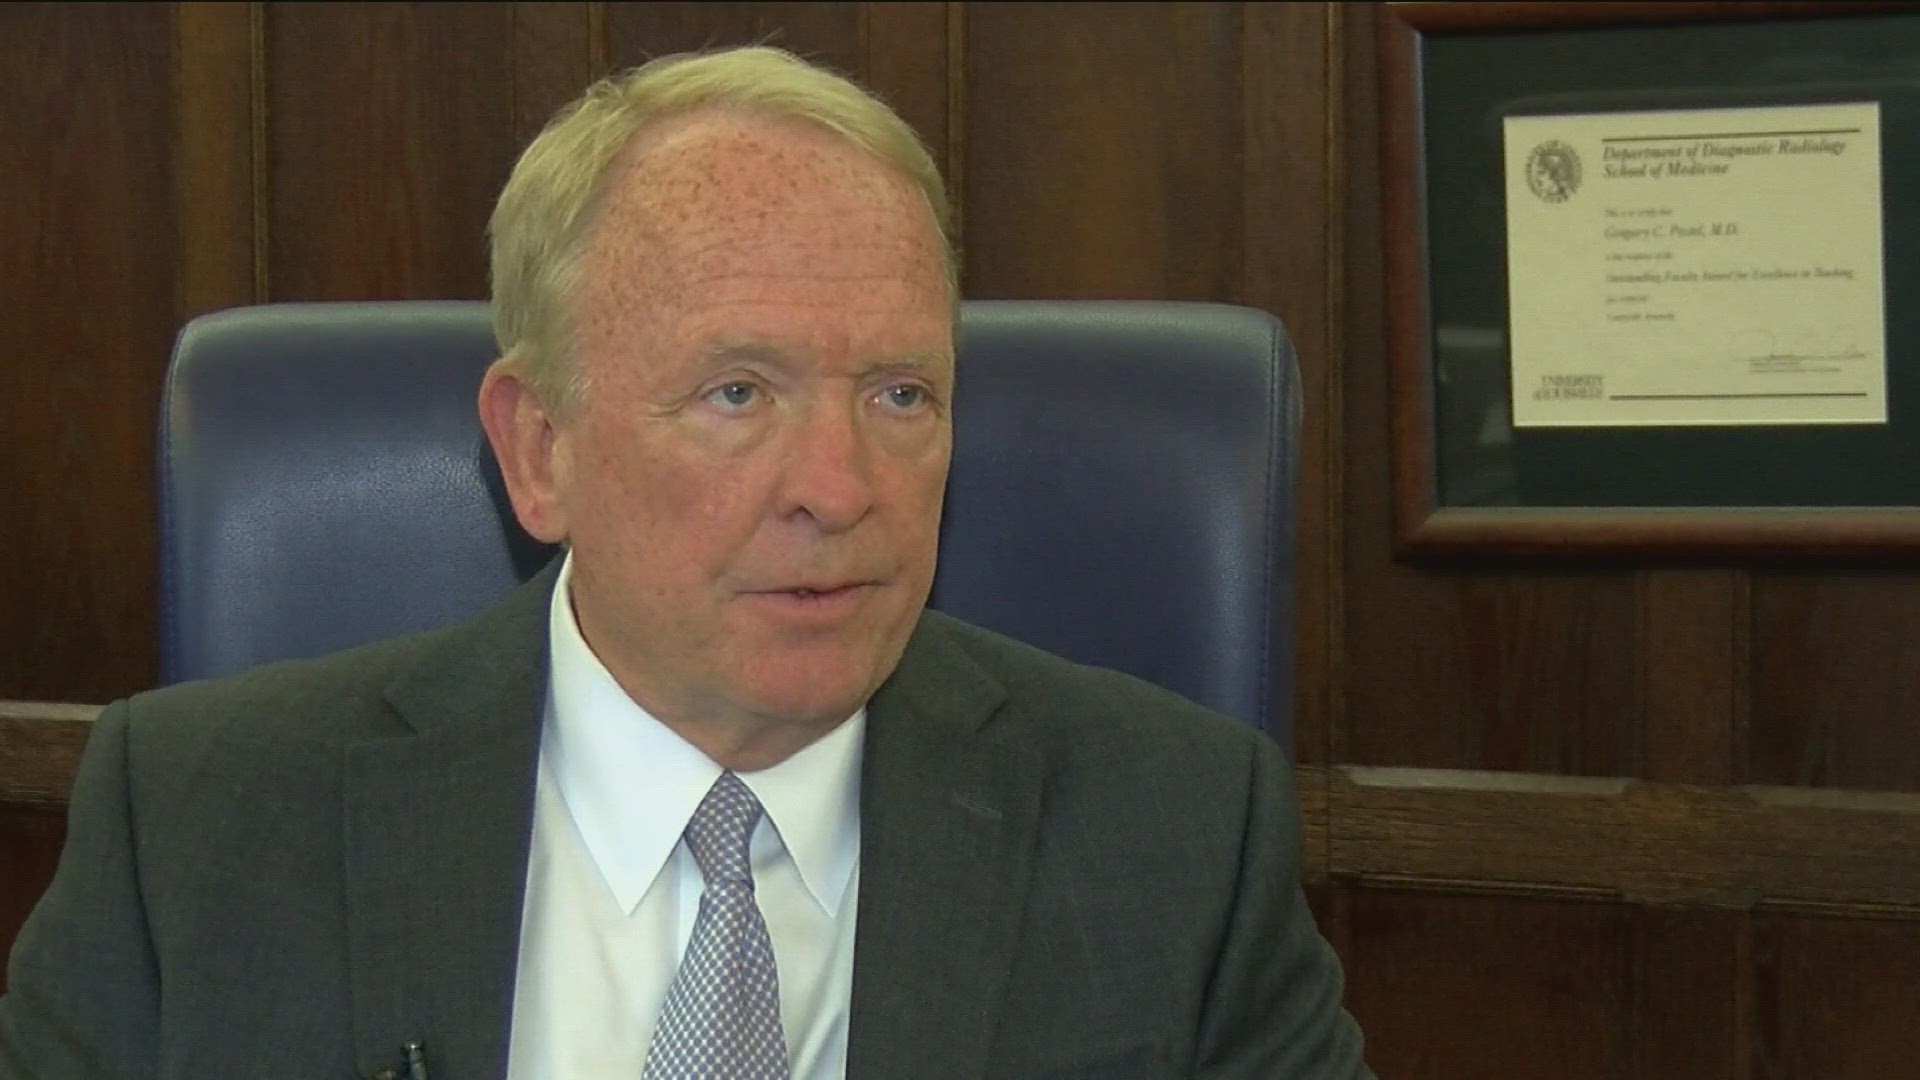 Gregory Postel became the University of Toledo's president in 2021 after serving as interim president in 2020.